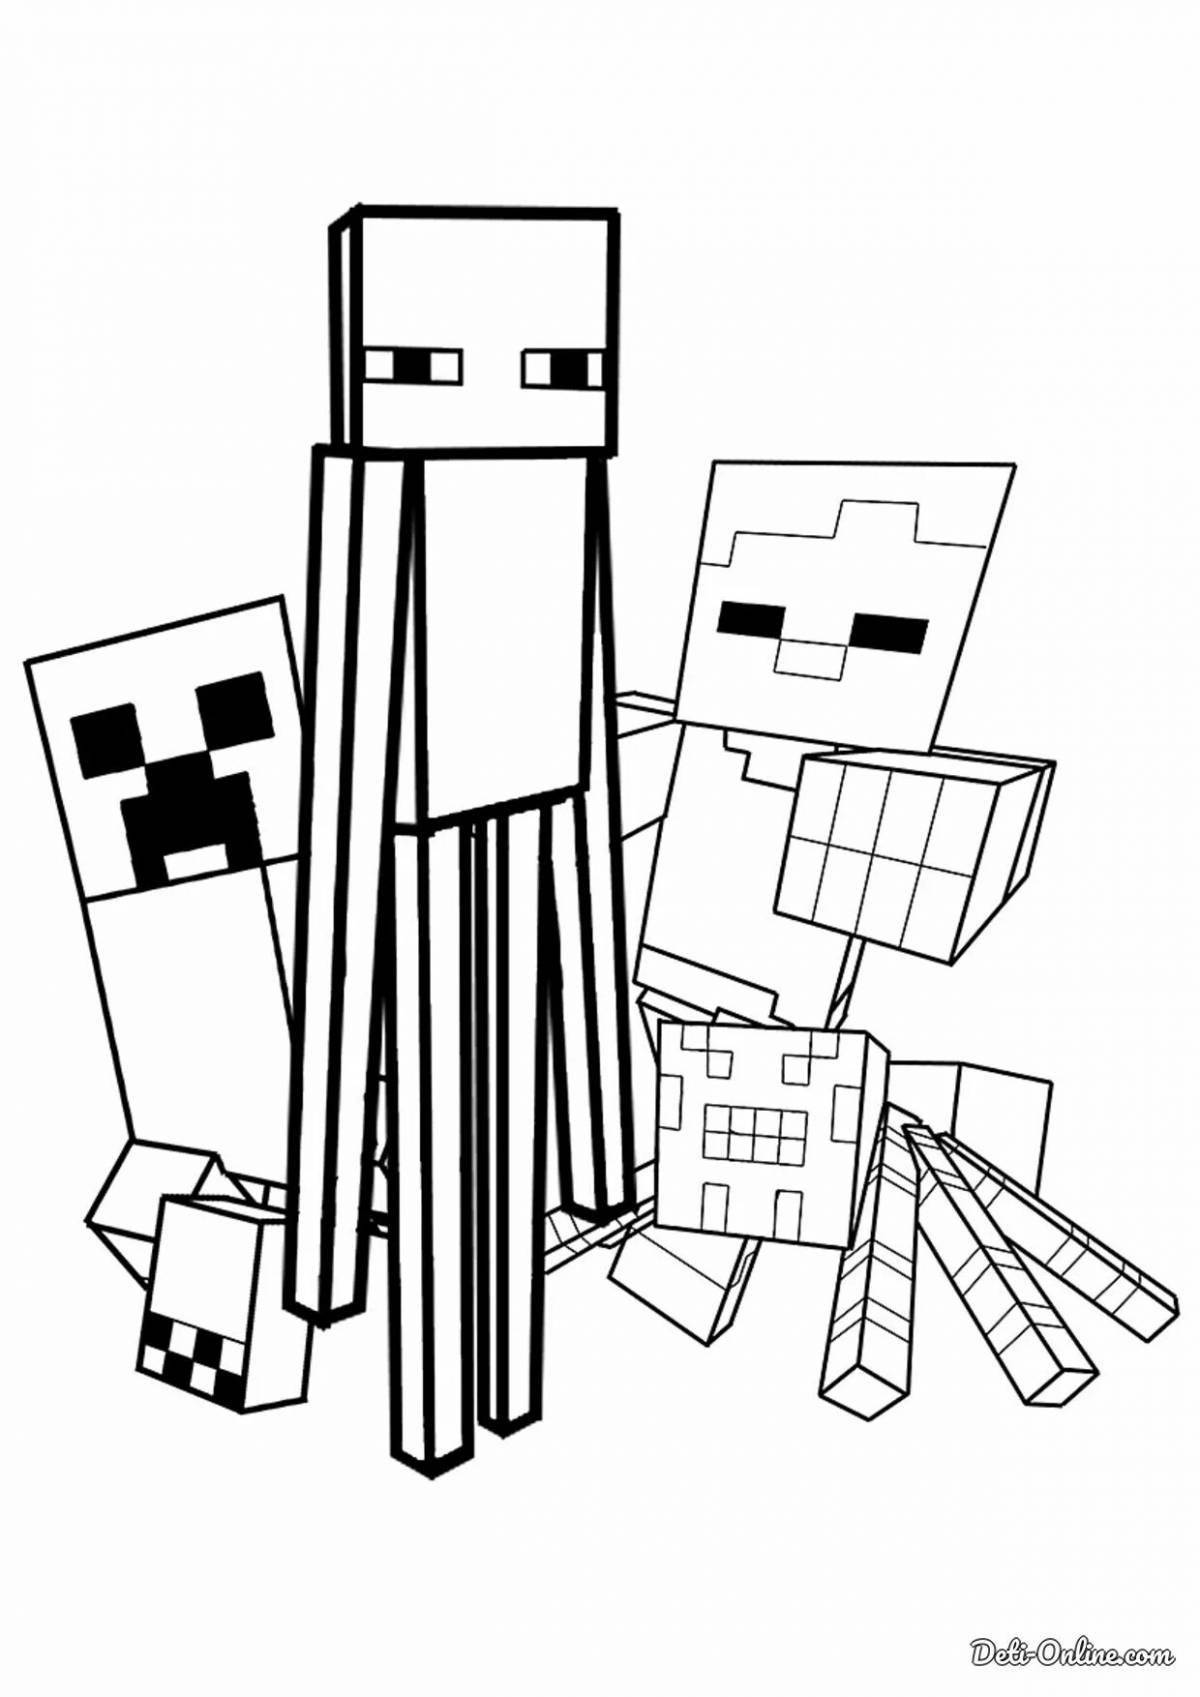 Tempting coloring for minecraft fans